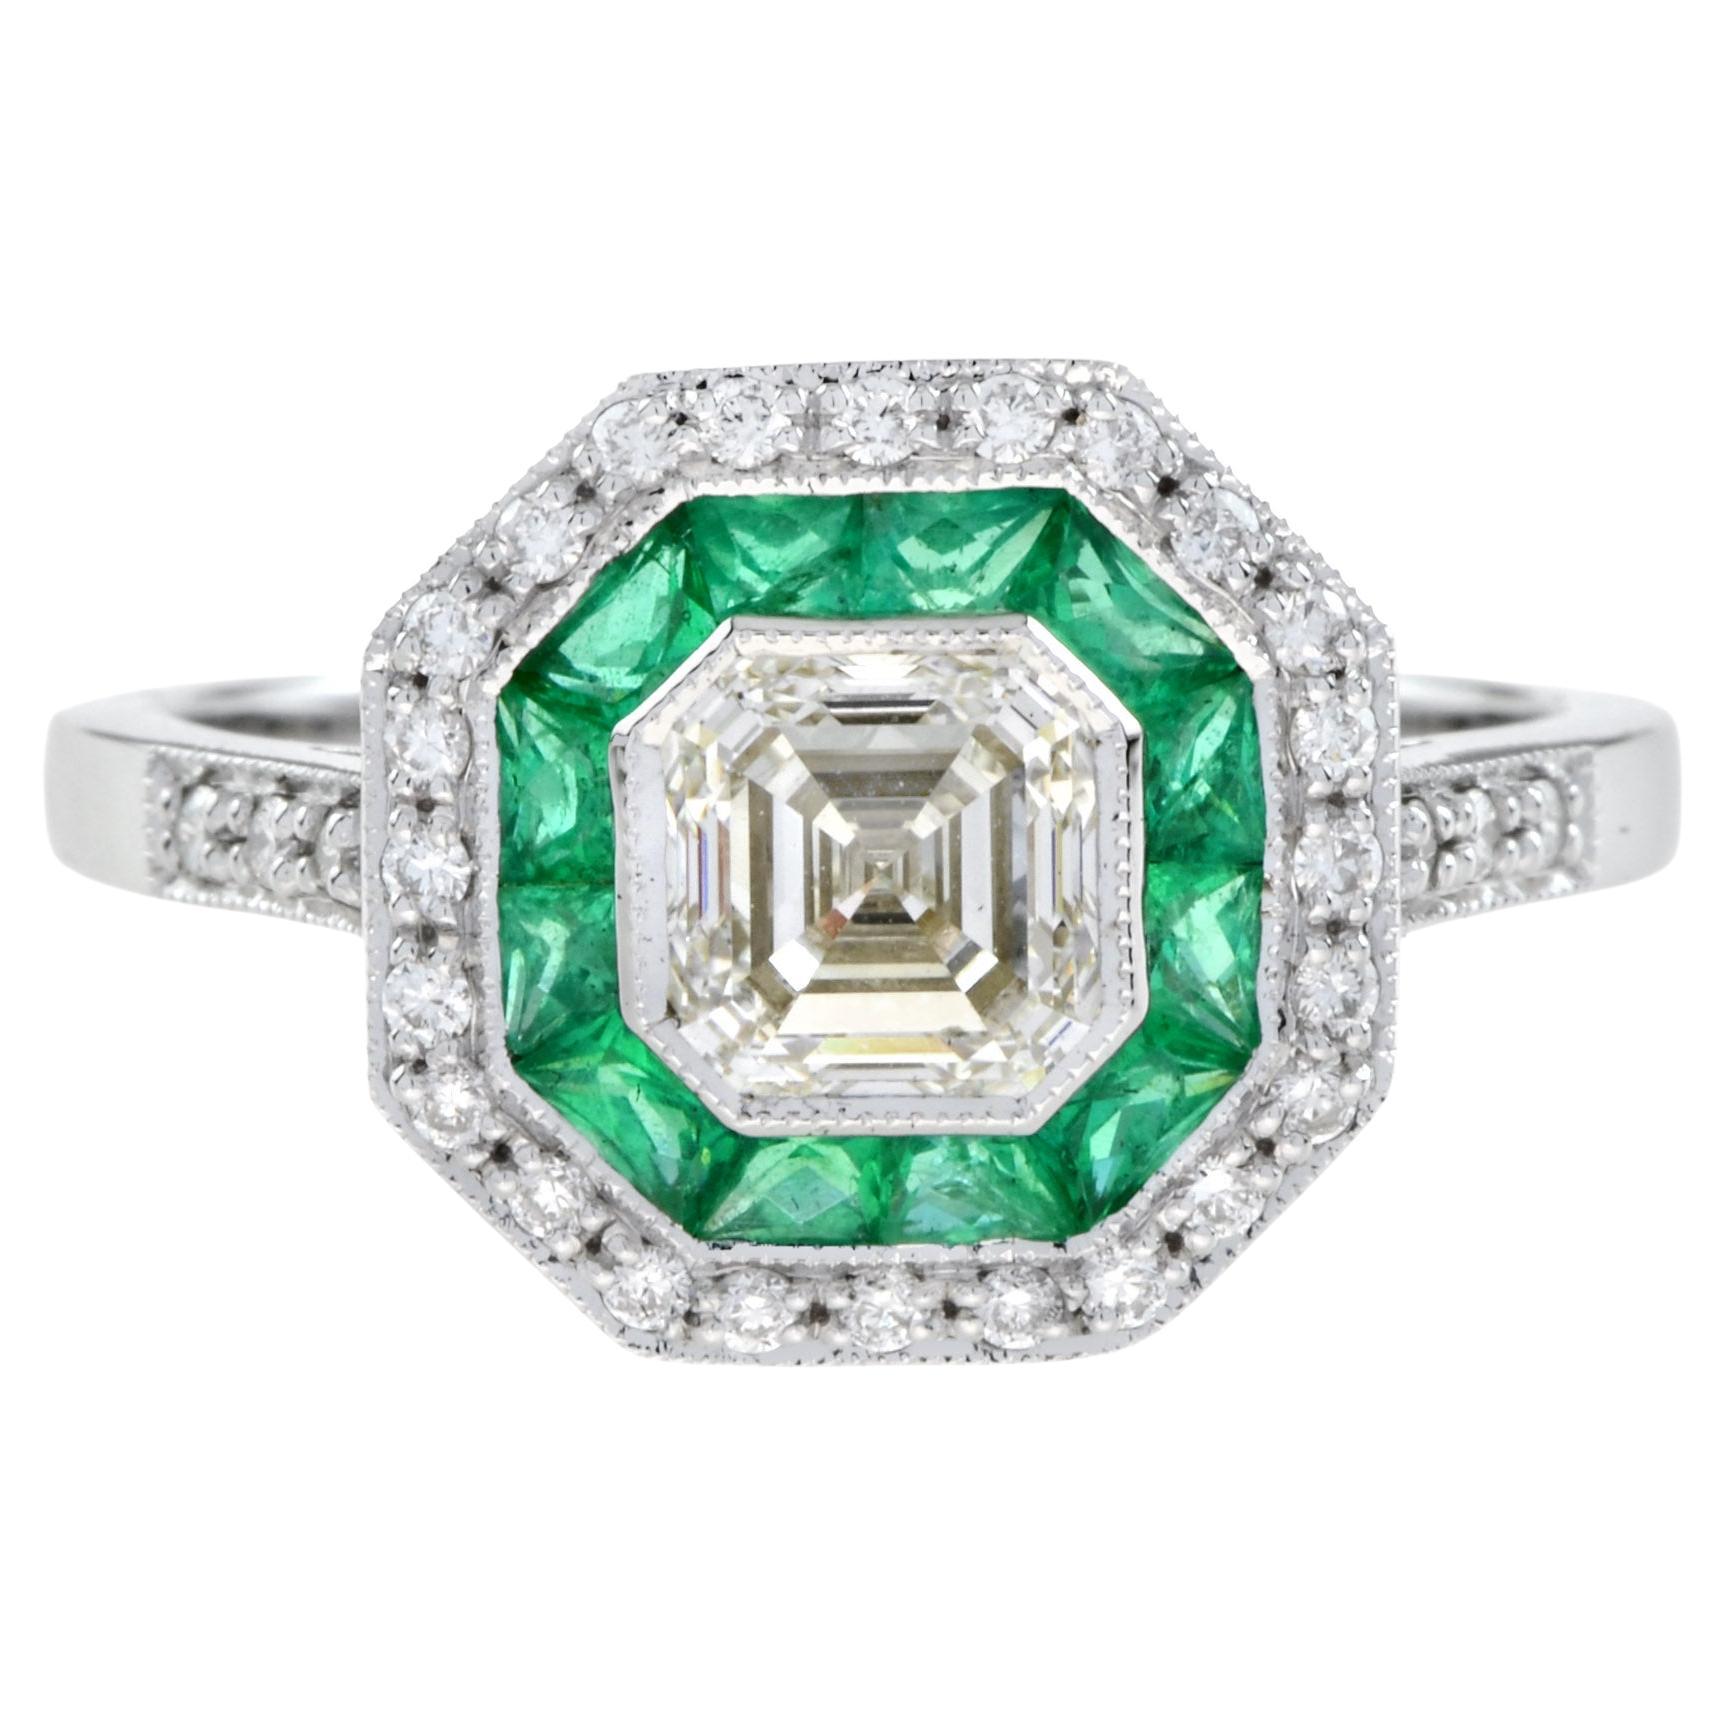 Art Deco Style Asscher Cut Diamond and Emerald Engagement Ring in 18K White Gold For Sale